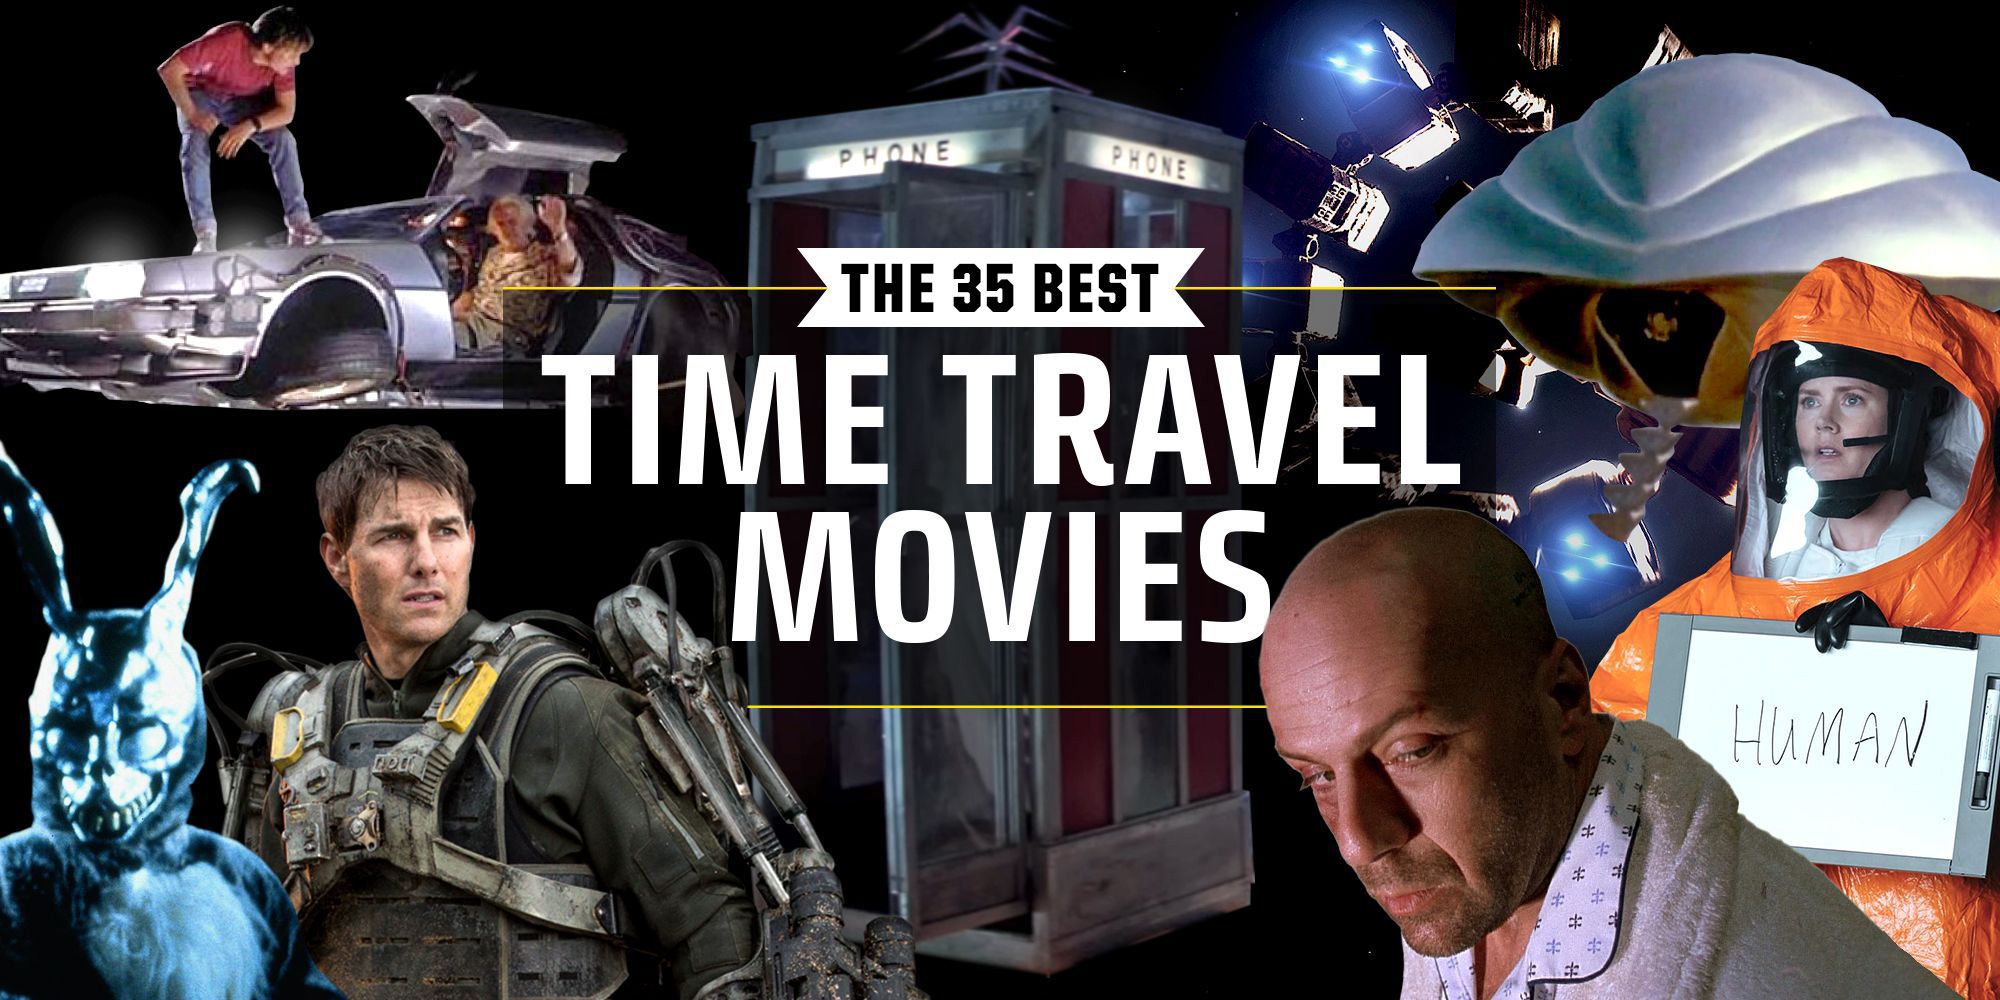 <p>Time travel movies often make for the most mind-numbing <a href="https://www.popularmechanics.com/culture/movies/g19609370/best-moments-sci-fi-movies/">sci-fi films</a> with paradoxes aplenty. But it’s those confusing temporal gymnastics that make them so fun. We’ve rounded up our favorites, from classic films like <em><a href="https://www.popularmechanics.com/science/a33458961/time-travel-methods-quantum-mechanics/">Back to the Future</a></em> and <em>Bill and Ted’s Excellent Adventure</em> to more recent flicks like <em>Arrival </em>and <em><a href="https://www.popularmechanics.com/culture/movies/a13386/this-is-why-interstellar-had-to-be-shot-in-imax-17415171/">Interstellar</a>,</em> which left our minds tangled in knots. </p><p>These are the 35 best sci-fi films that explore the fluidity of time.</p><p><strong> 🤯 You love mind-bending science. So do we. <a href="https://join.popularmechanics.com/pubs/HR/POP/POP1_Plans.jsp?cds_page_id=250088&cds_mag_code=POP&cds_tracking_code=edit-best-time-travel-movies">Let’s nerd out over it together.</a></strong></p>